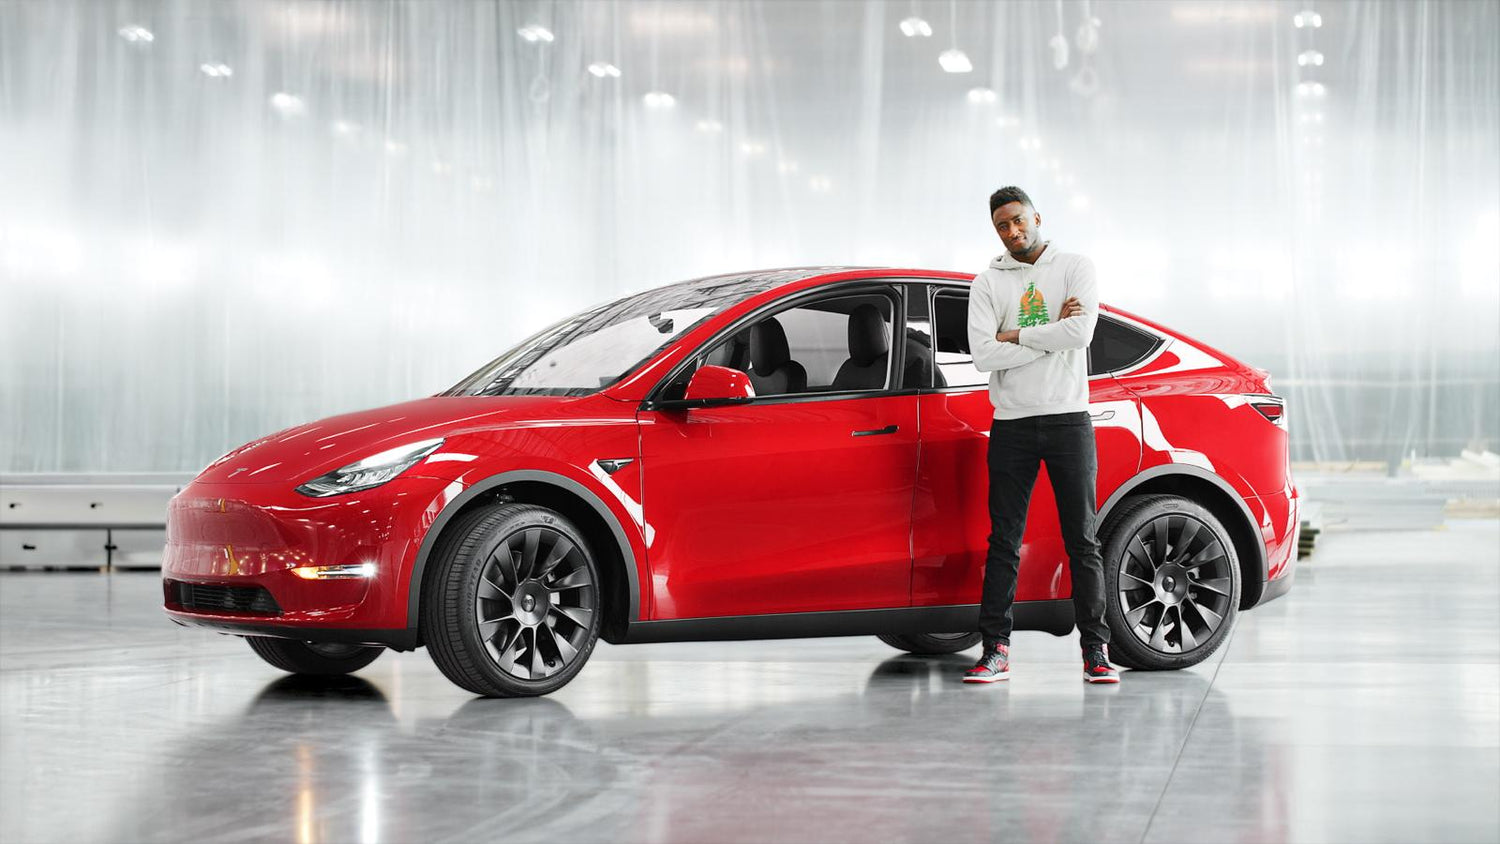 Tesla Model Y Review By Marques Brownlee, Explains Why It’s The Most Important Vehicle Yet